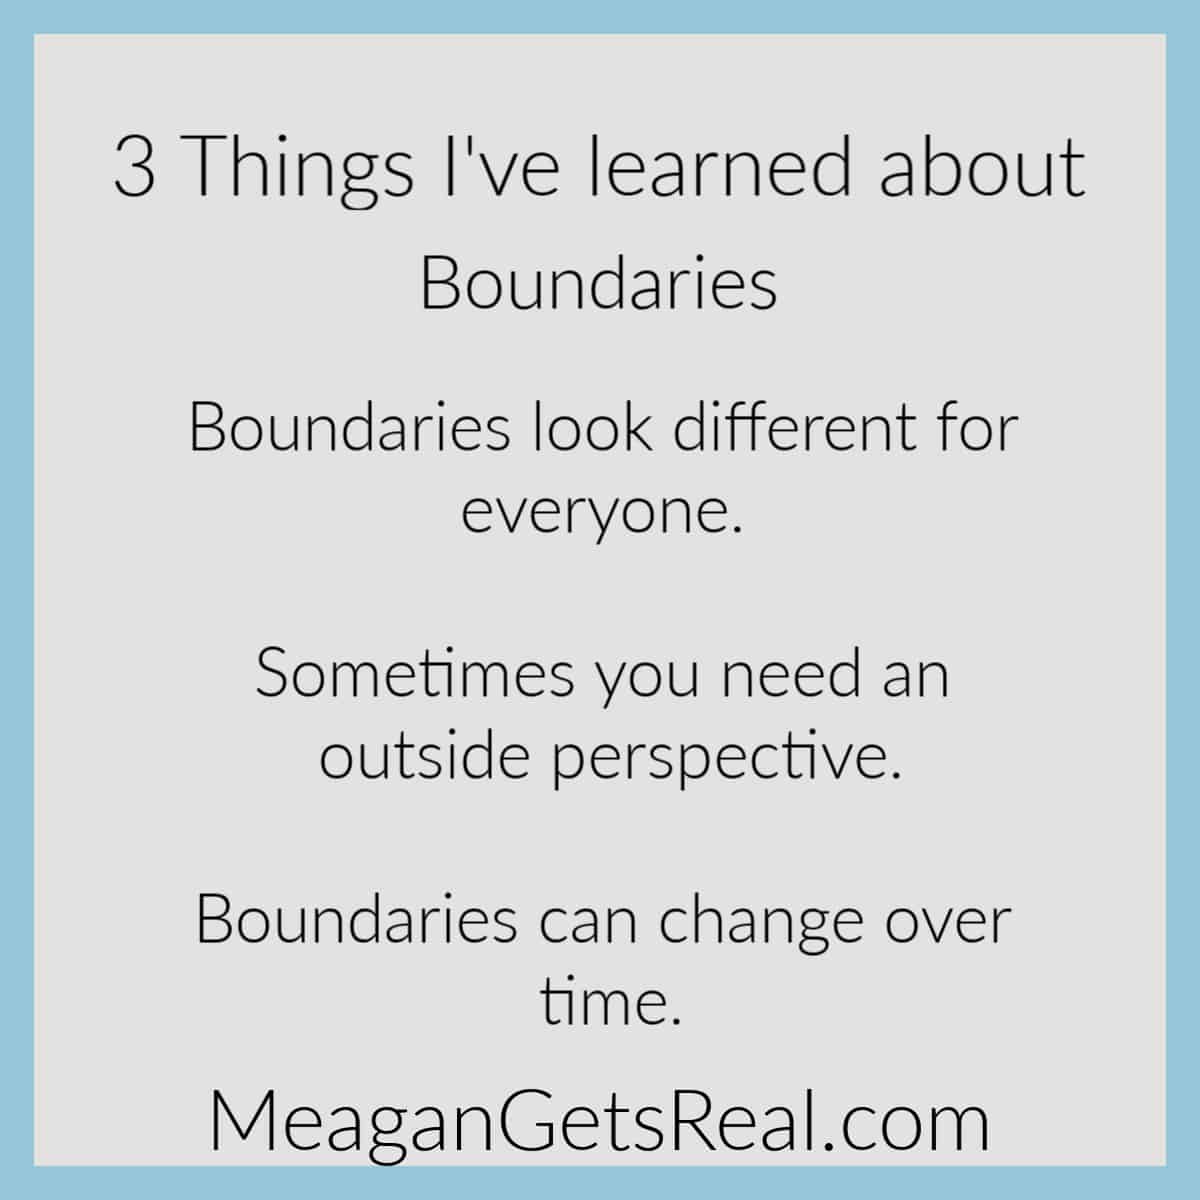 3 Things I've learned about boundaries. Support for moms doesn't have to be hard to find with this comprehensive guide filled with parenting resources for moms you won't want to miss.